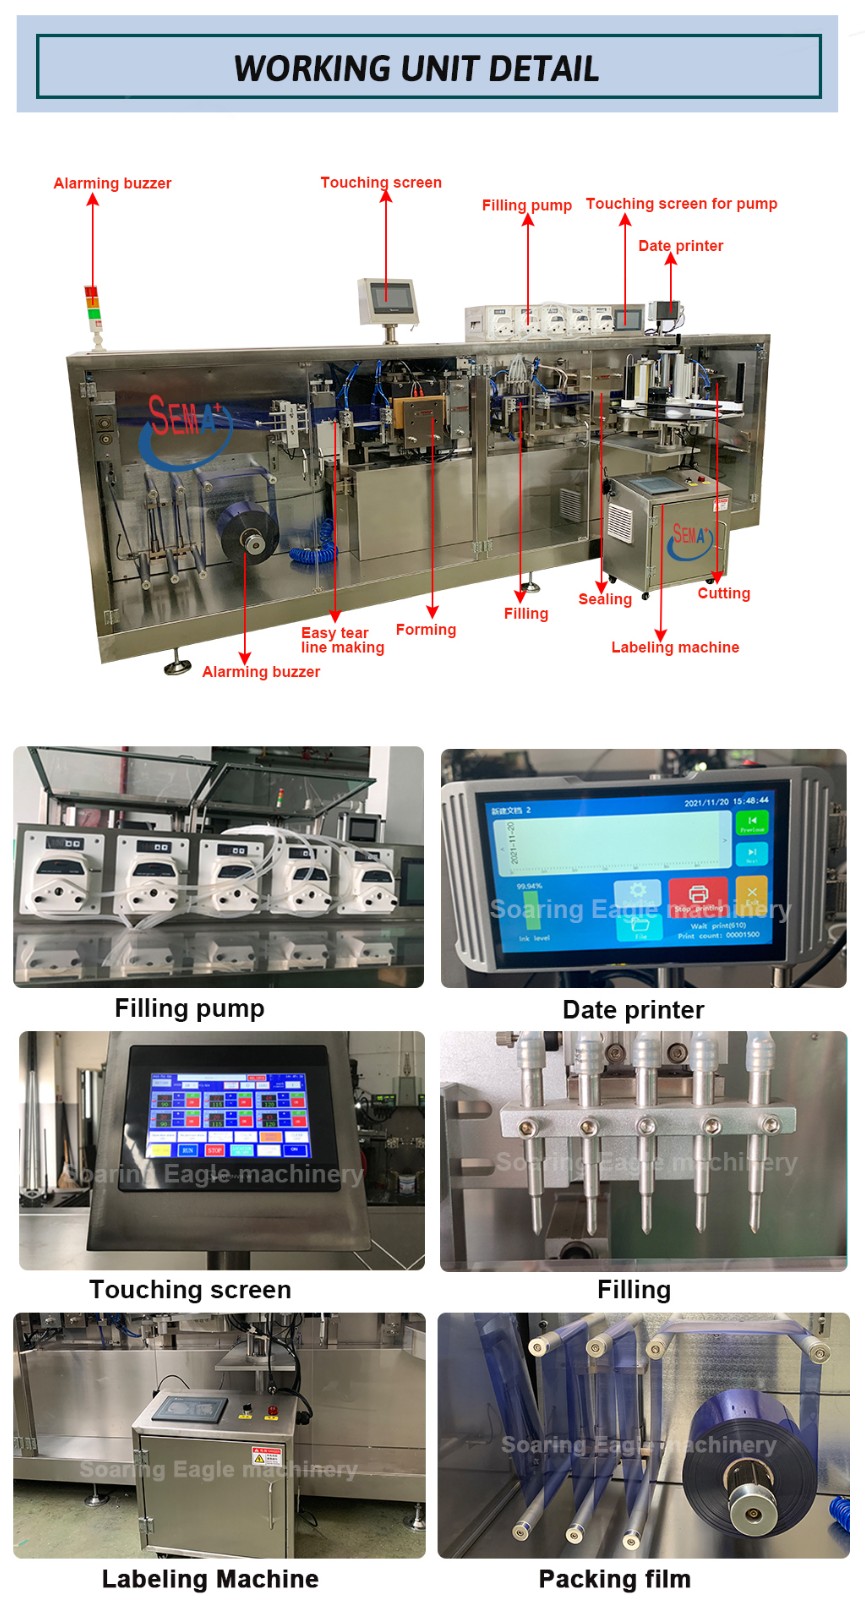 Fully automatic plastic ampoule filling and sealing machine for labelable oral liquid